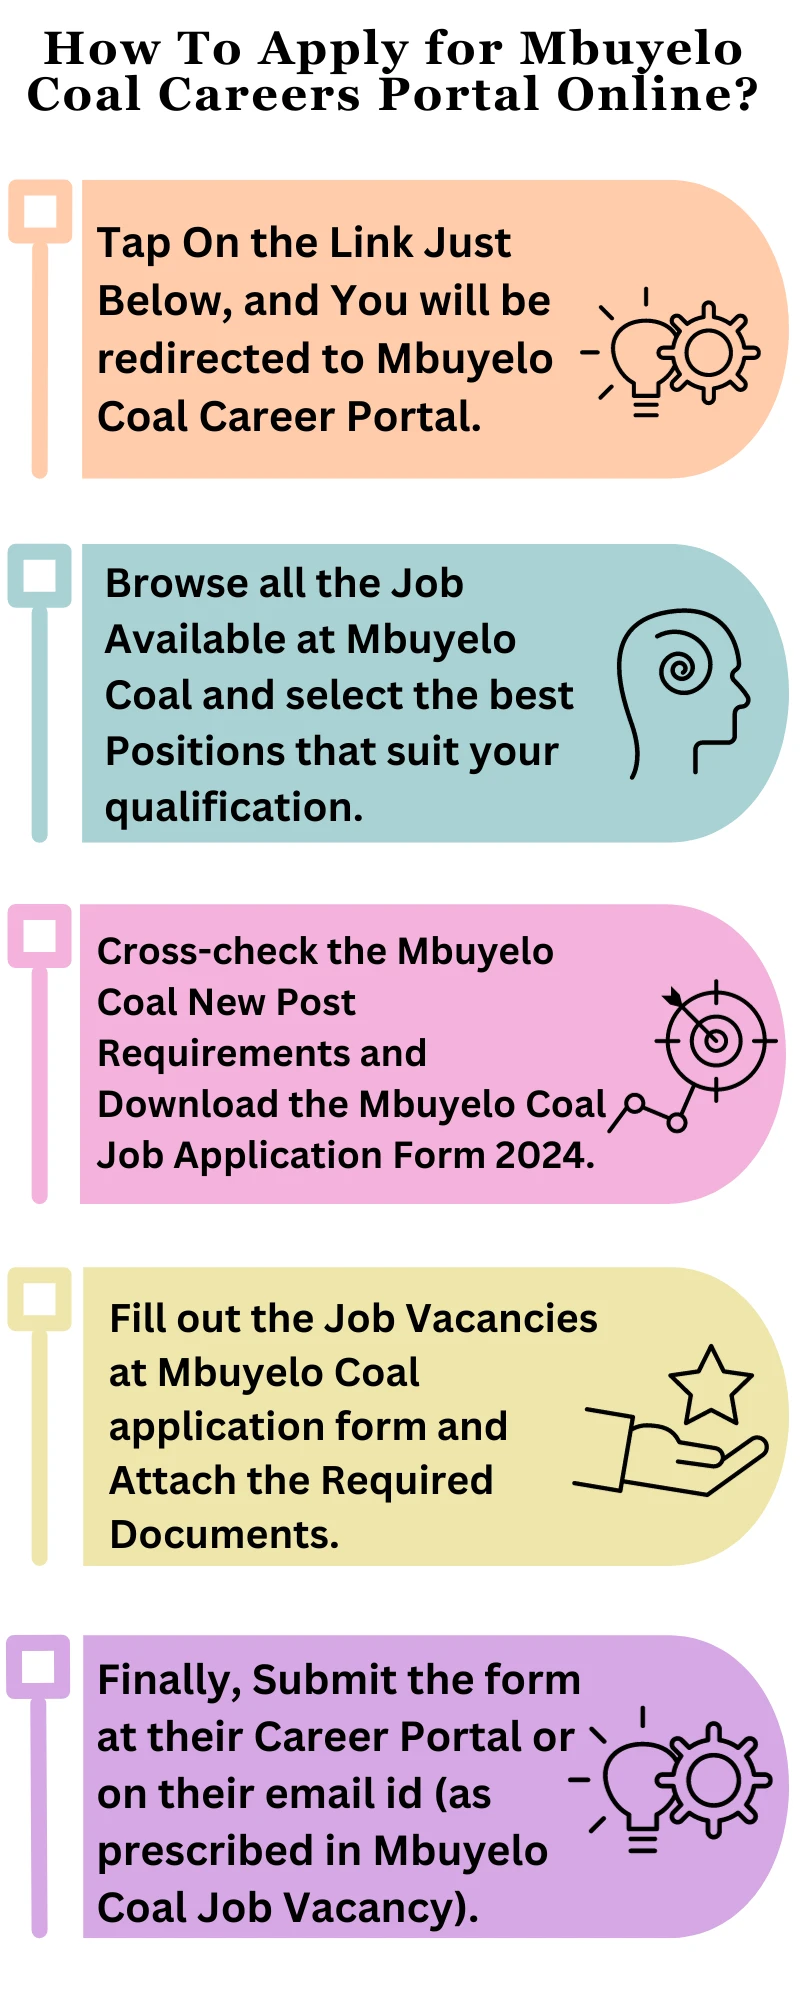 How To Apply for Mbuyelo Coal Careers Portal Online?